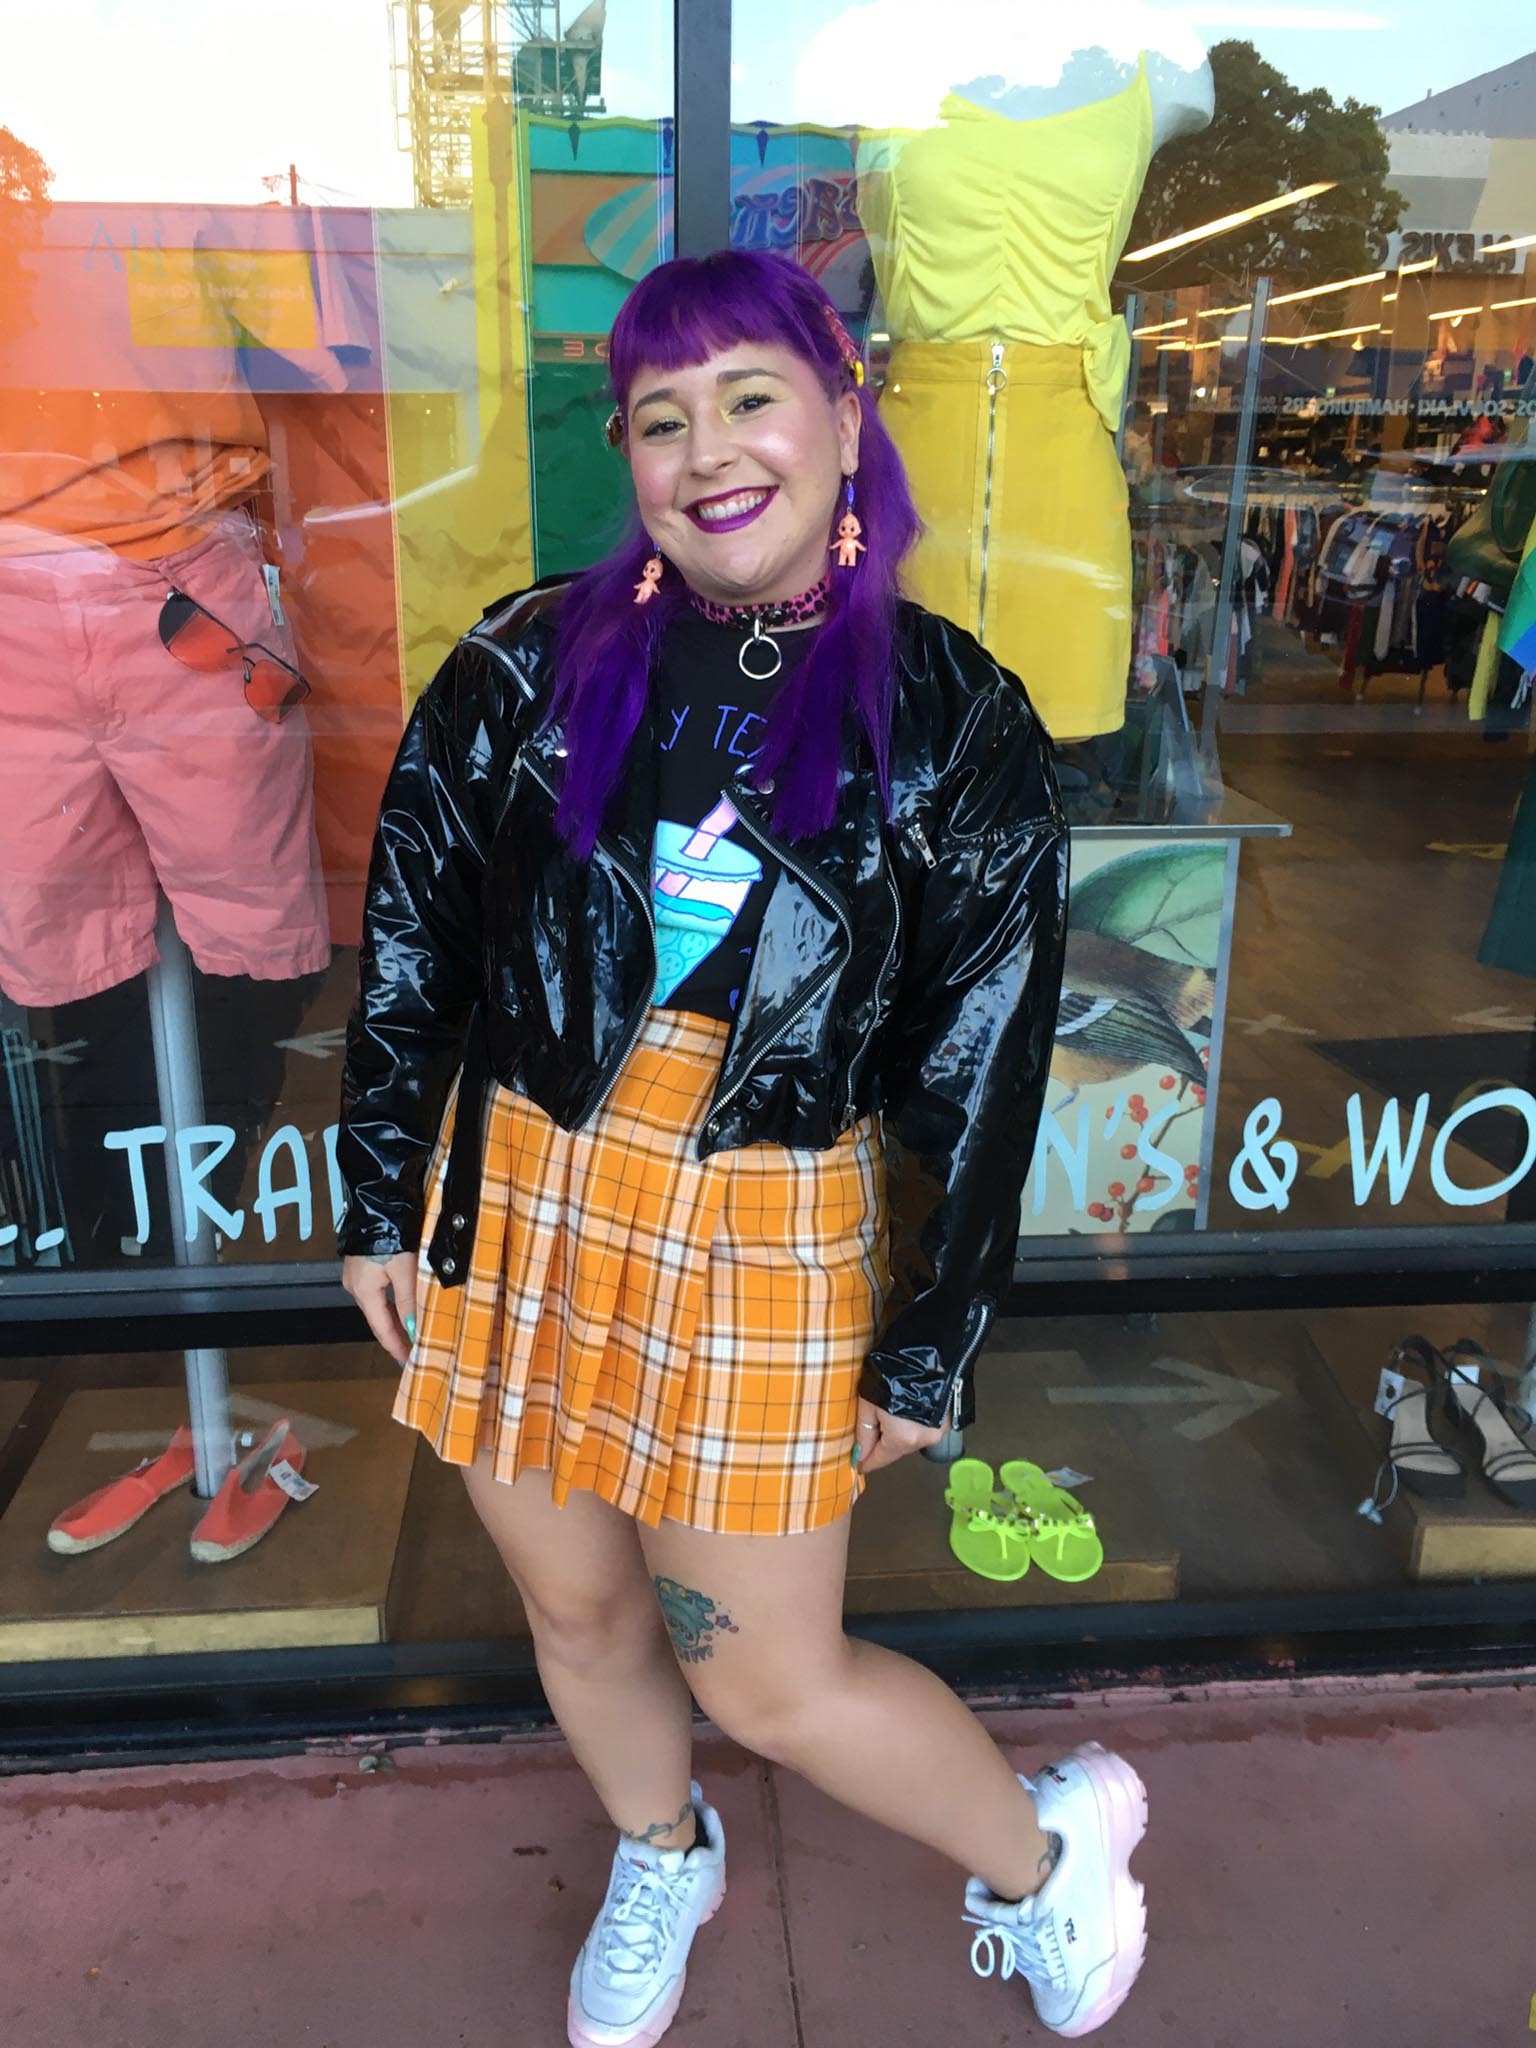 Smiling person with purple hair stands in front of shop window wearing an orange pleated skirt and black vinyl moto jacket